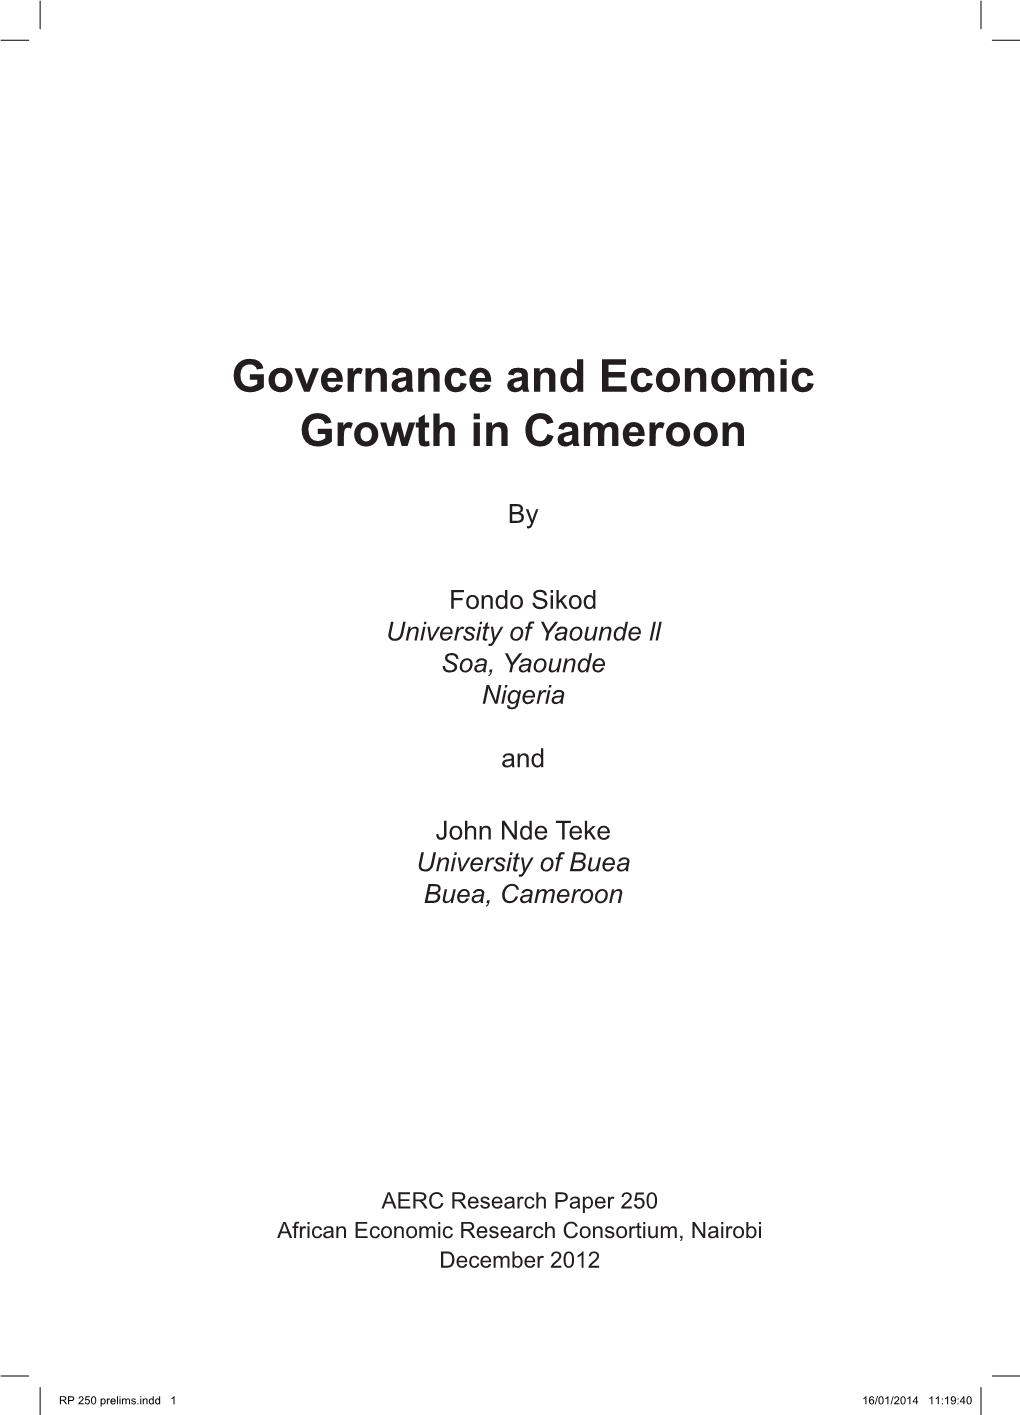 Governance and Economic Growth in Cameroon